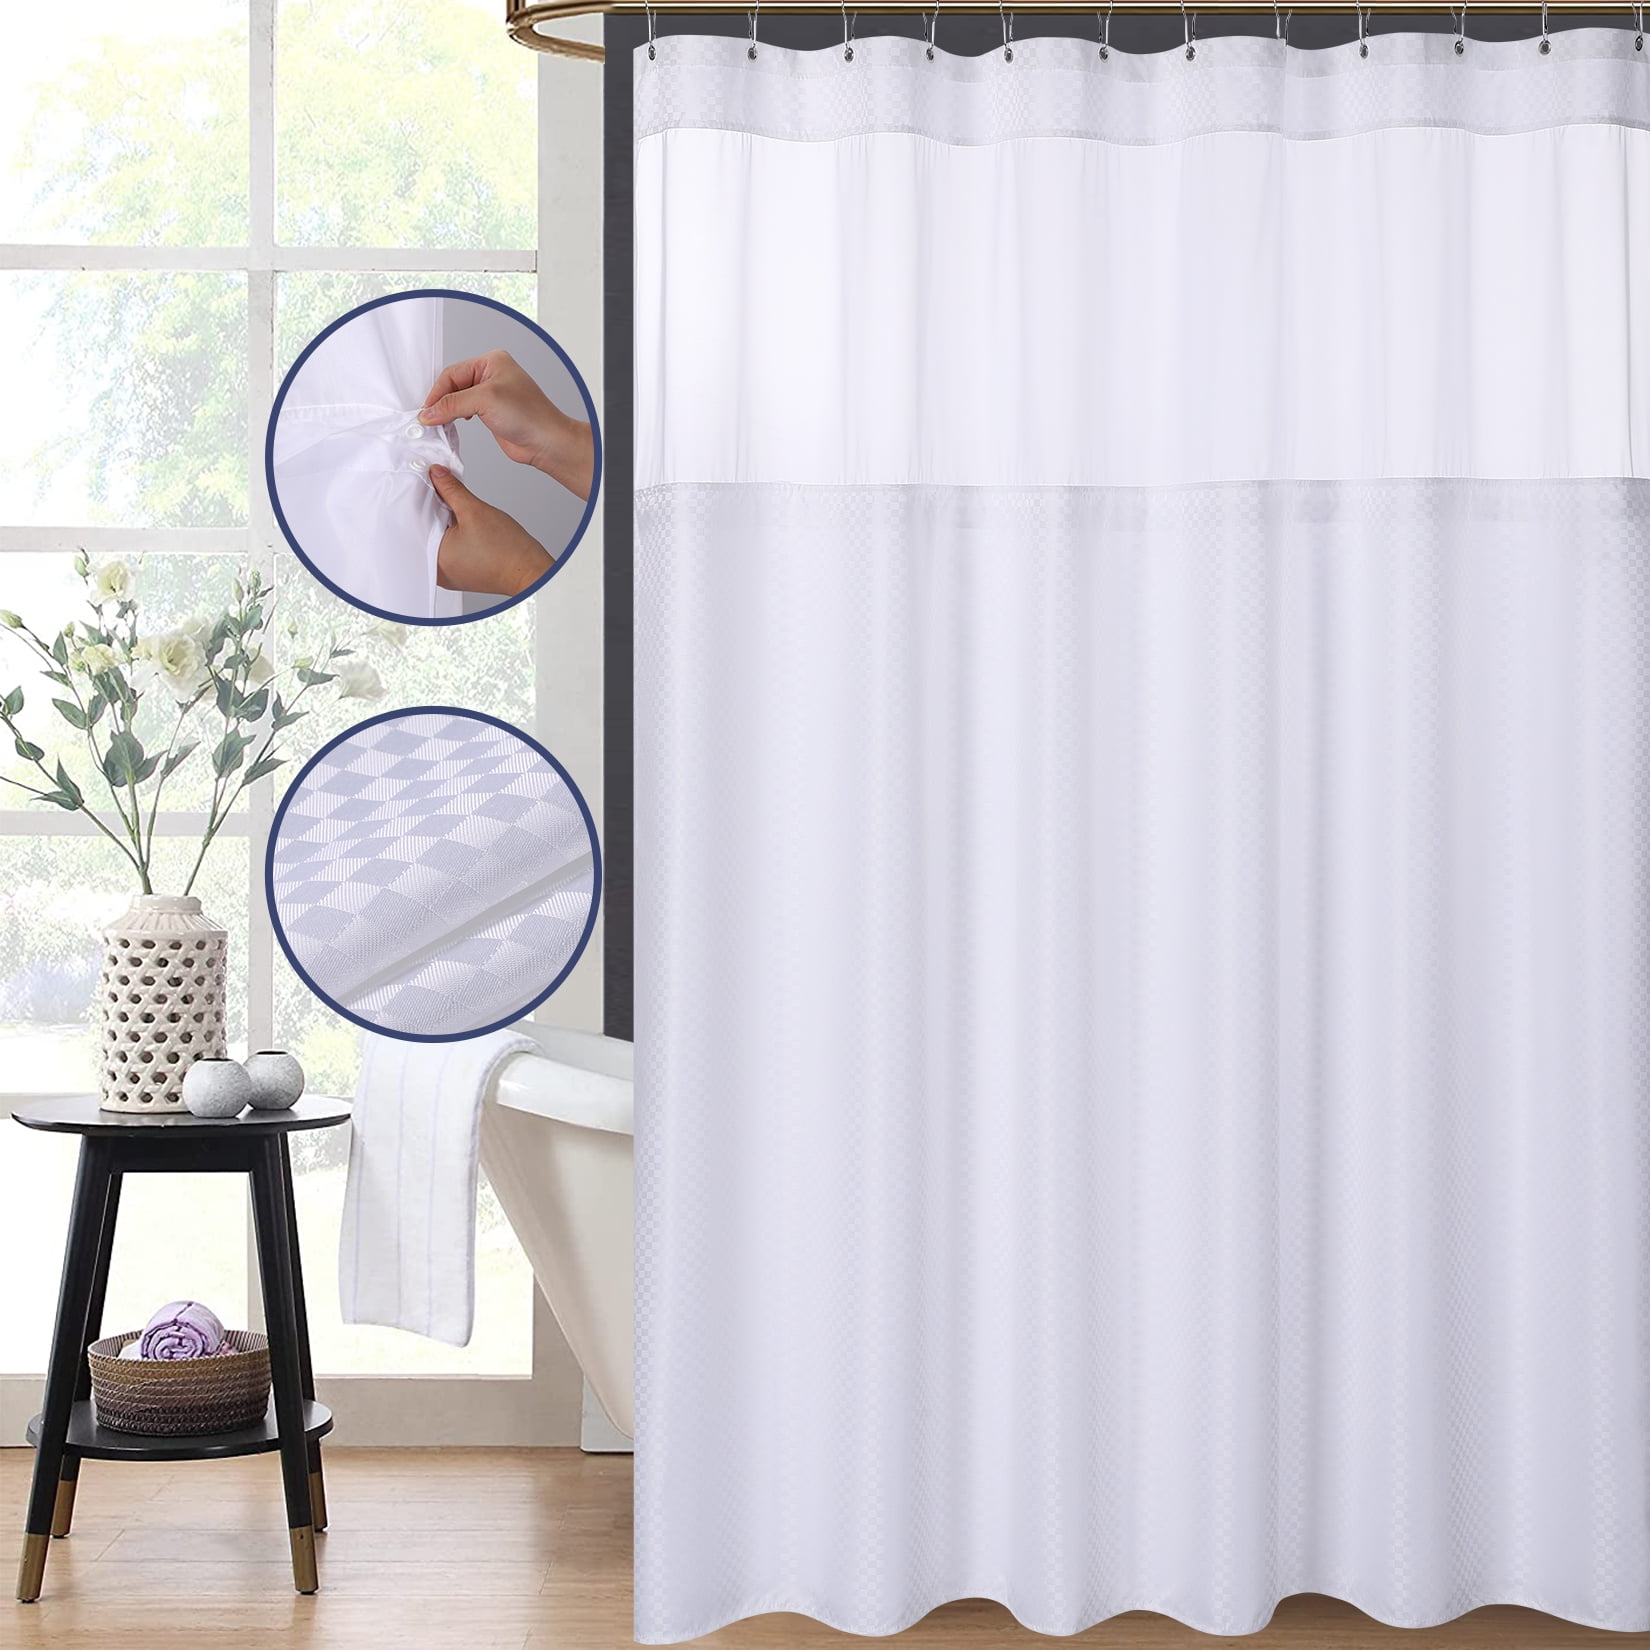 Details about   Lagute CozyHook Heavy Duty Linen-Like Hook Free Shower Curtain Water Repellent, 